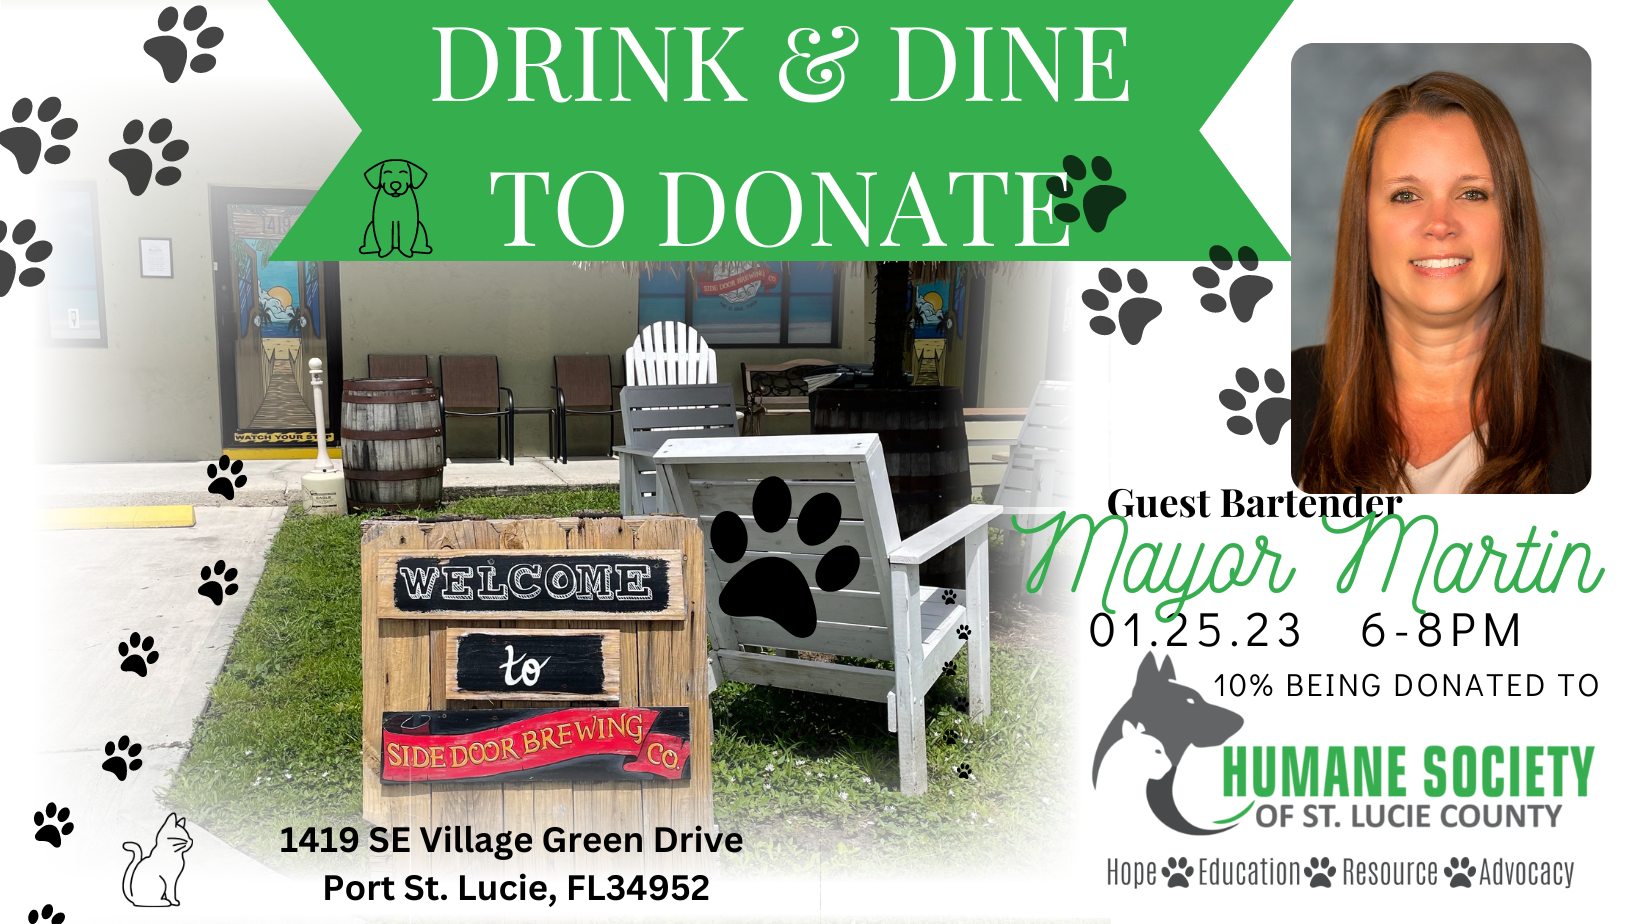 Dine and Drink to Donate at Side Door Brewing company to Support the Humane Society of St. Lucie County